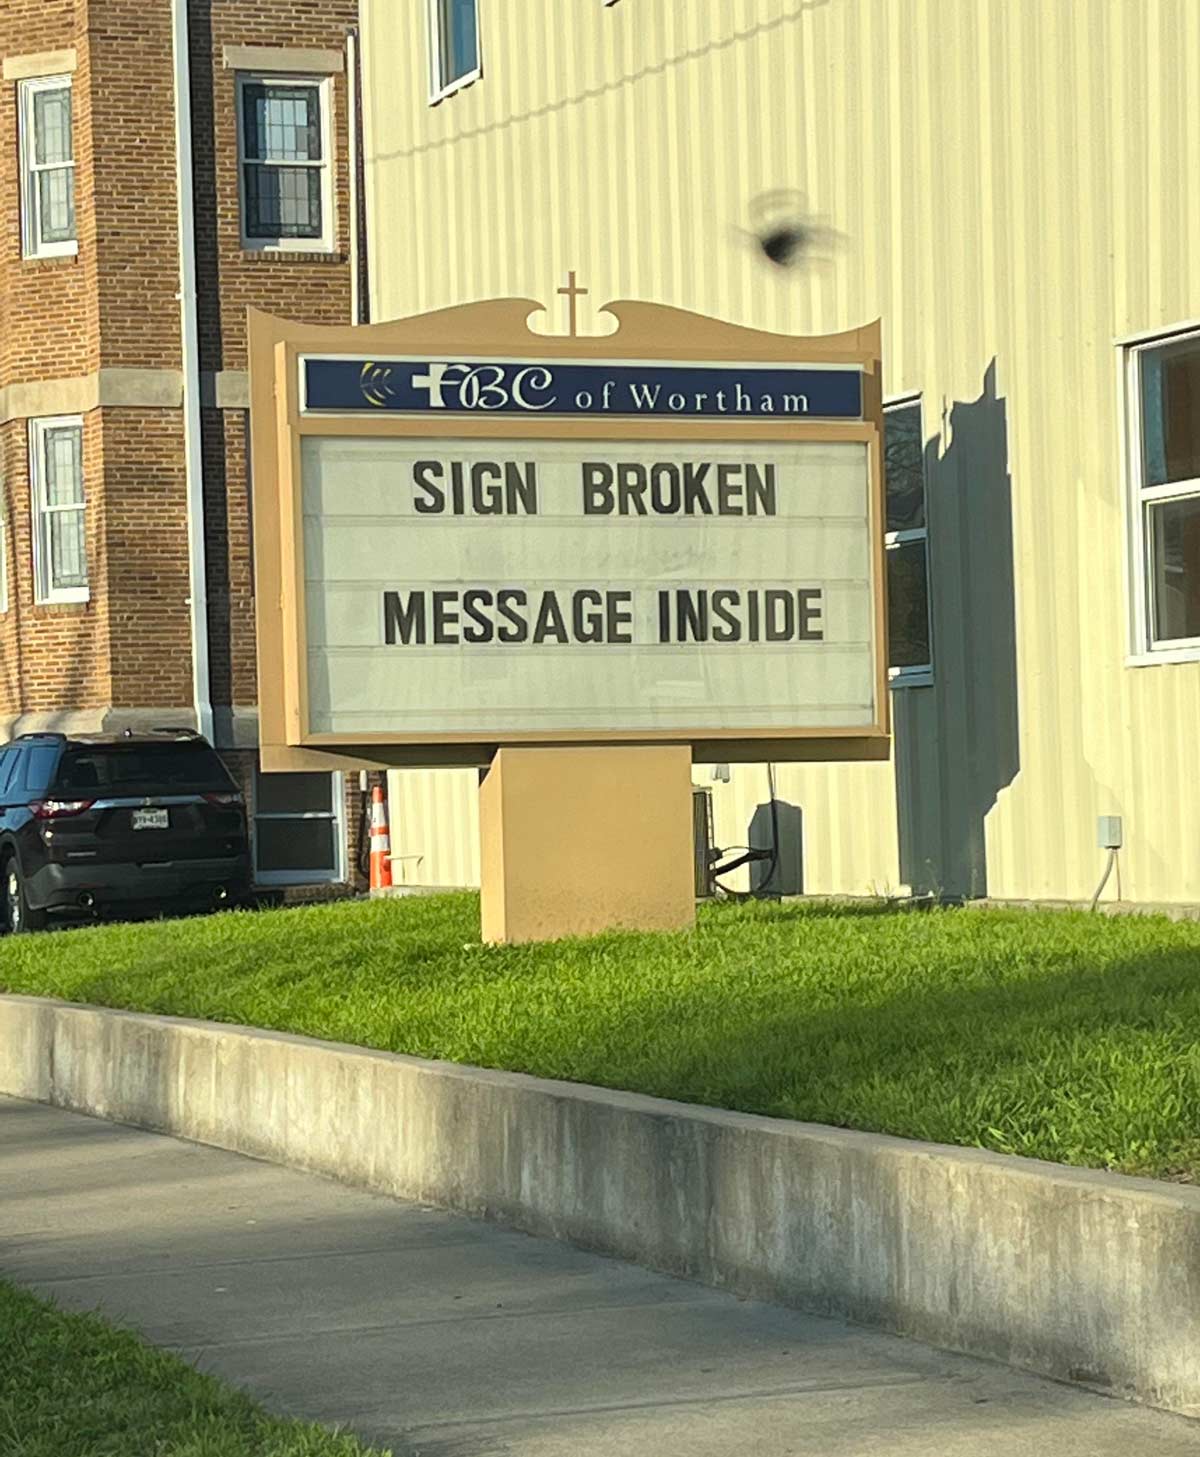 I passed by this sign on a road trip